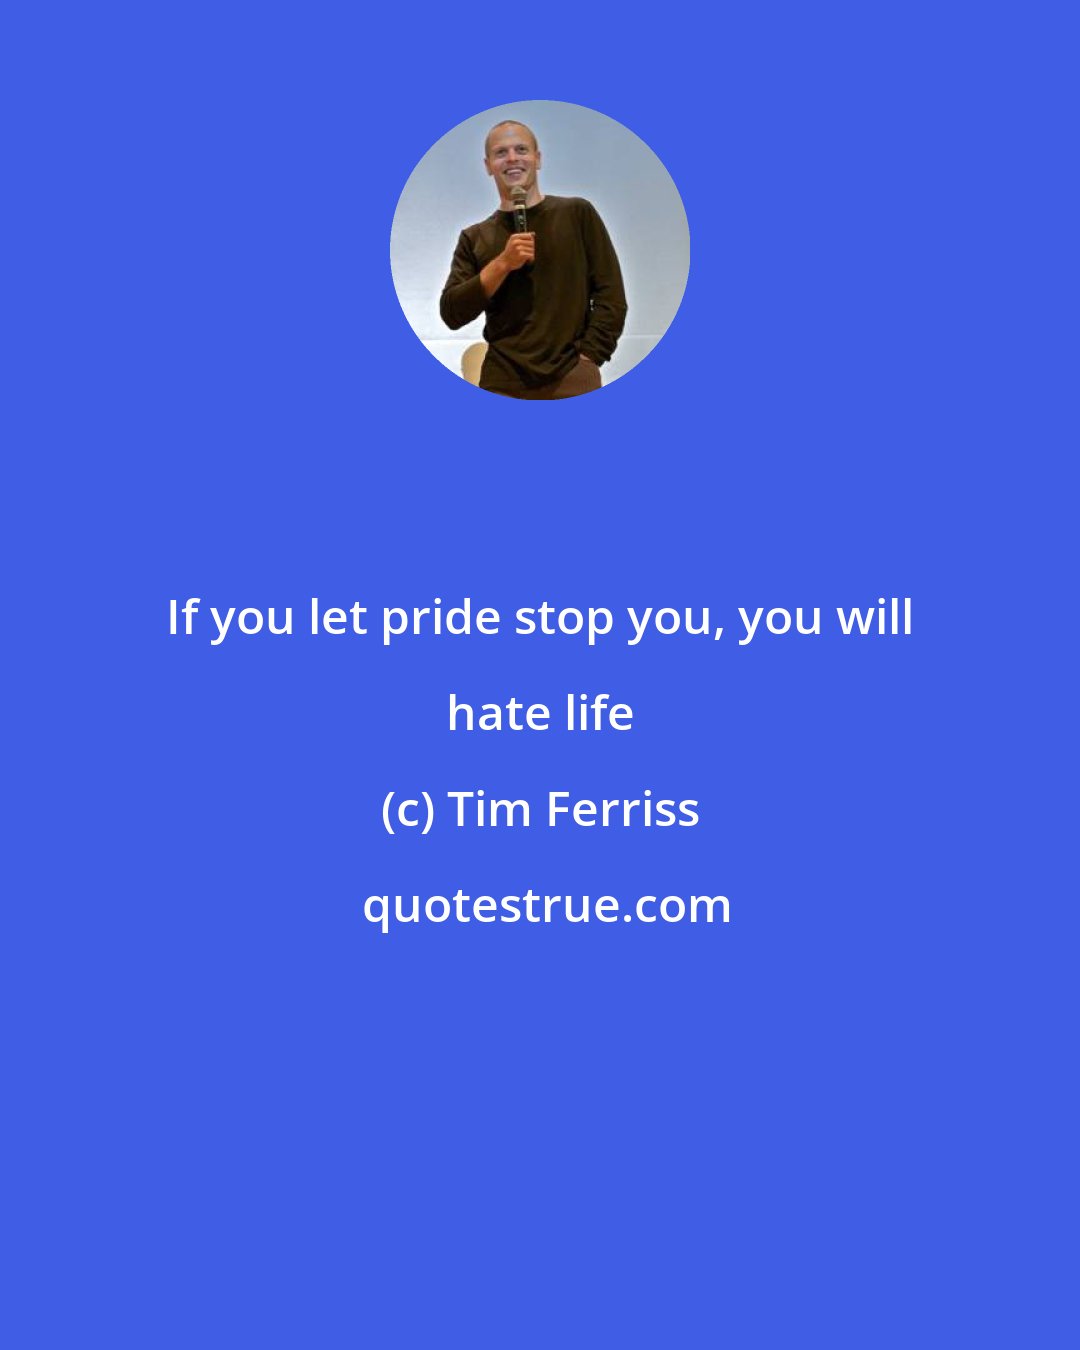 Tim Ferriss: If you let pride stop you, you will hate life